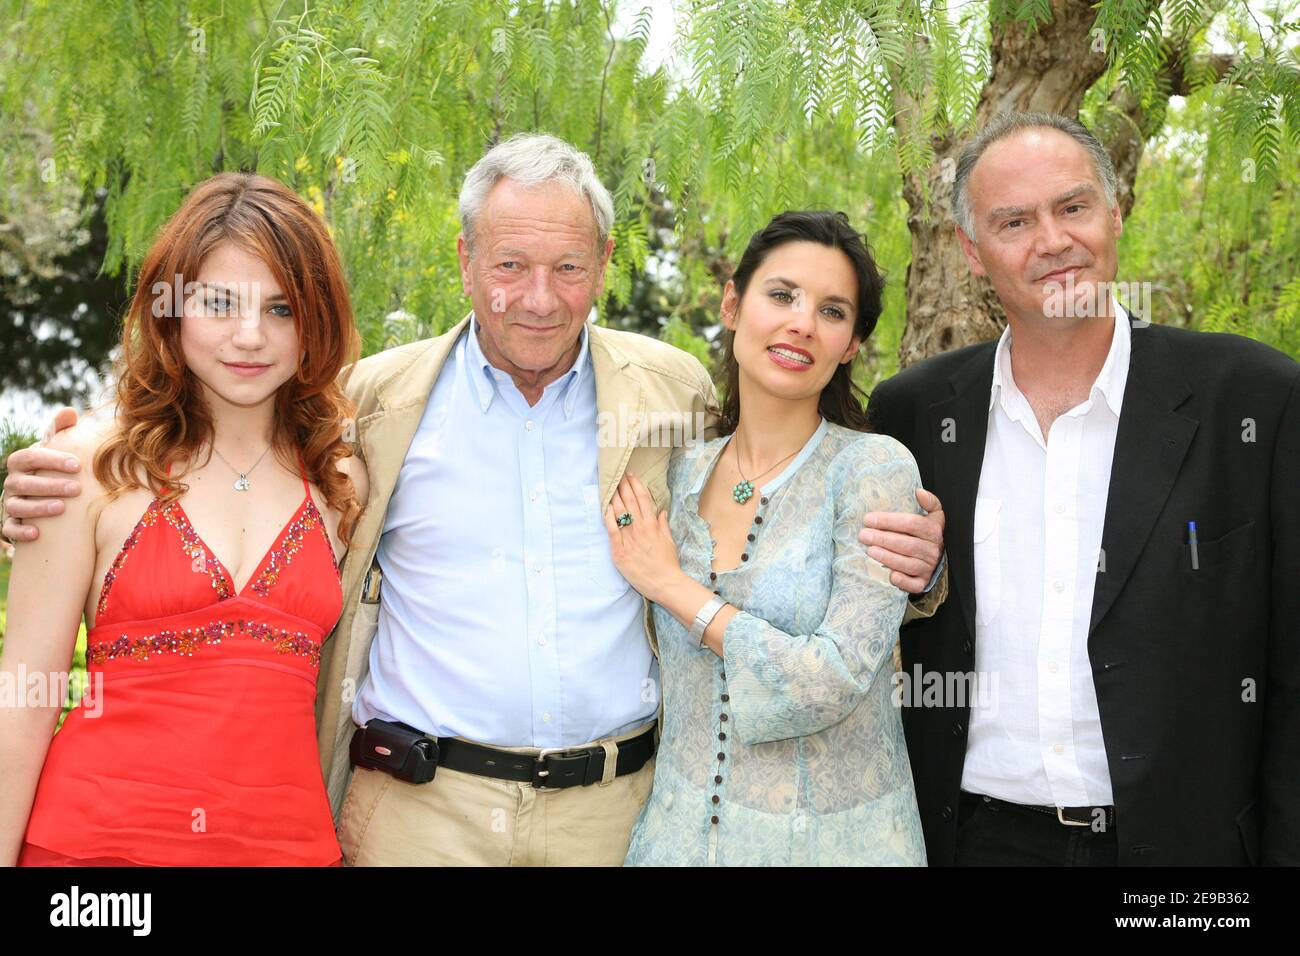 Emilie Dequenne, Vania Vilers, Noemie Kocher and Dominique Othenin Girard pose during '46th Monaco Television Festival' in Monaco, on June 28, 2006. Photo by Denis Guignebourg/ABACAPRESS.COM Stock Photo